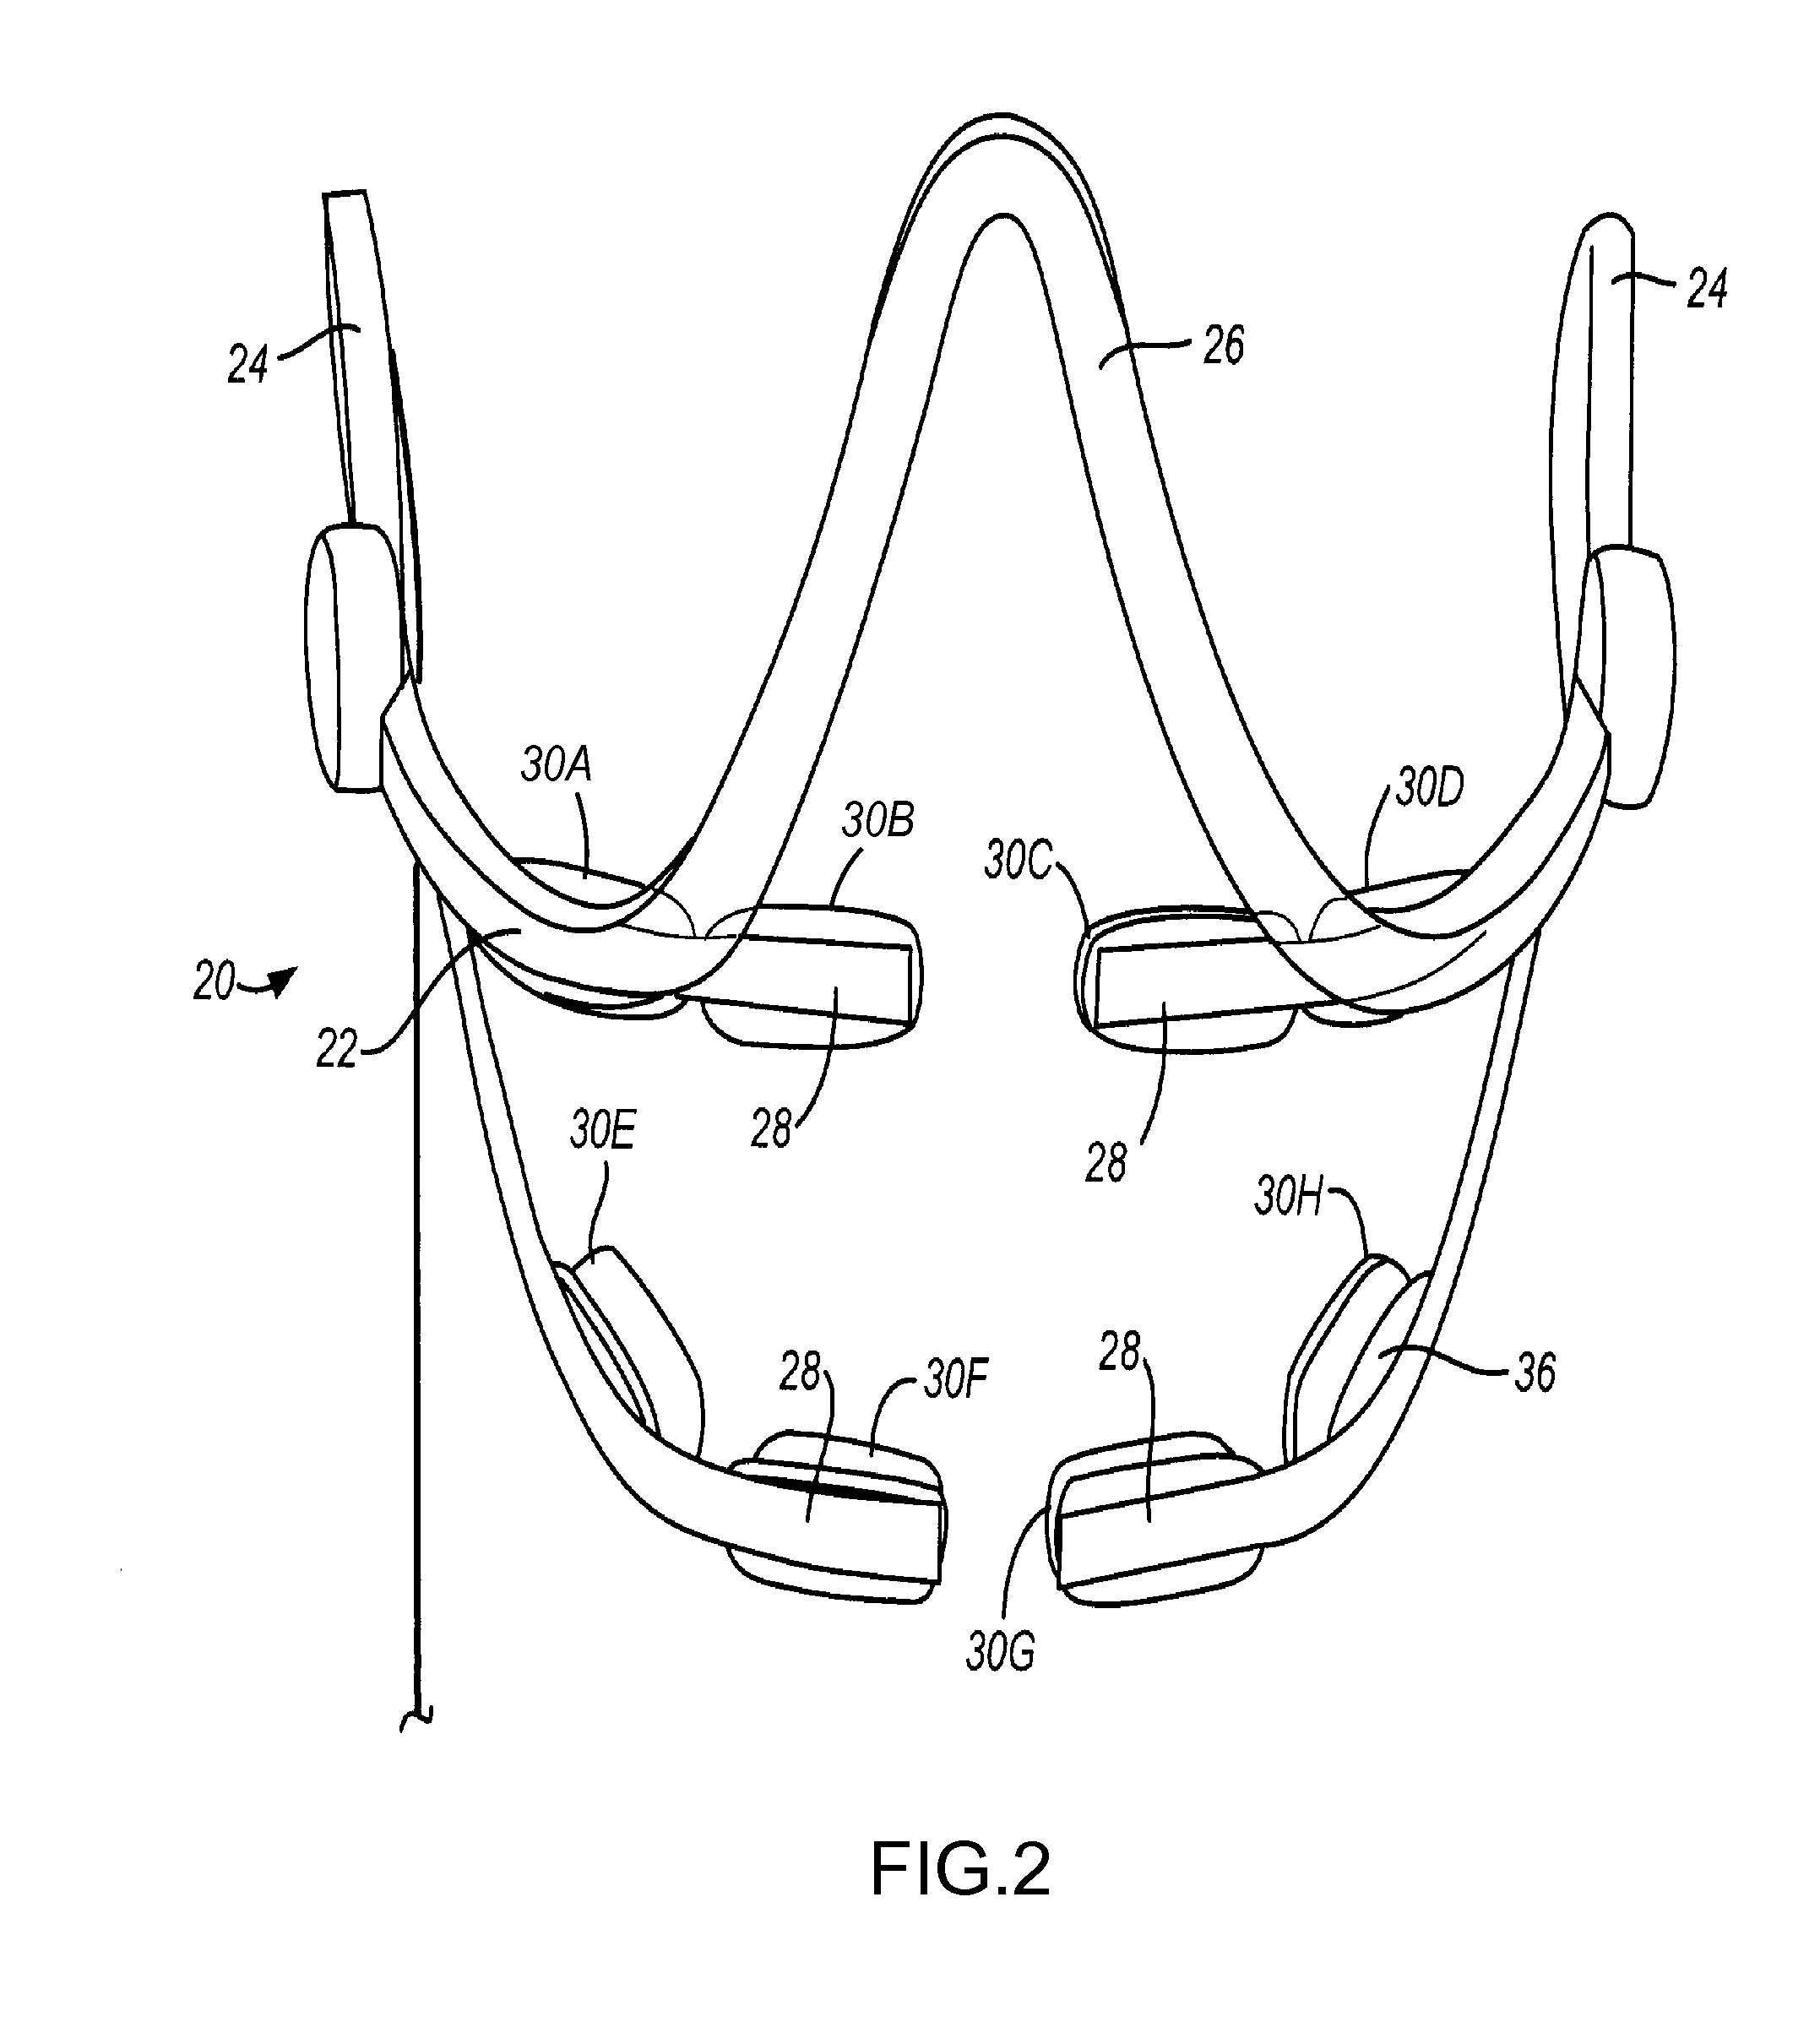 Methods and apparatuses useful for regulating bone remodeling or tooth movement using light therapy, a functional appliance, and/or vitamin d